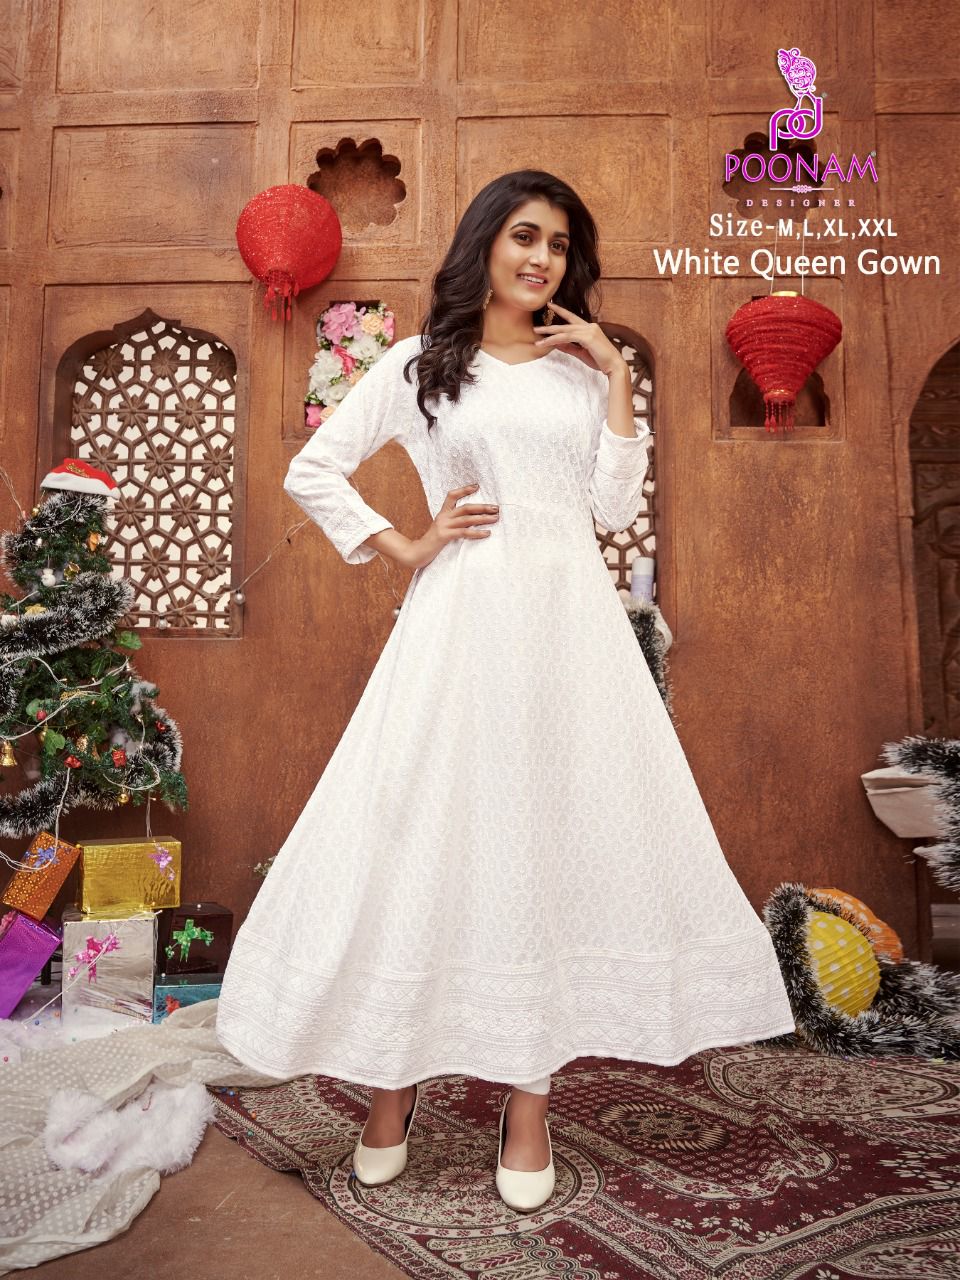 poonam White Queen collection 3